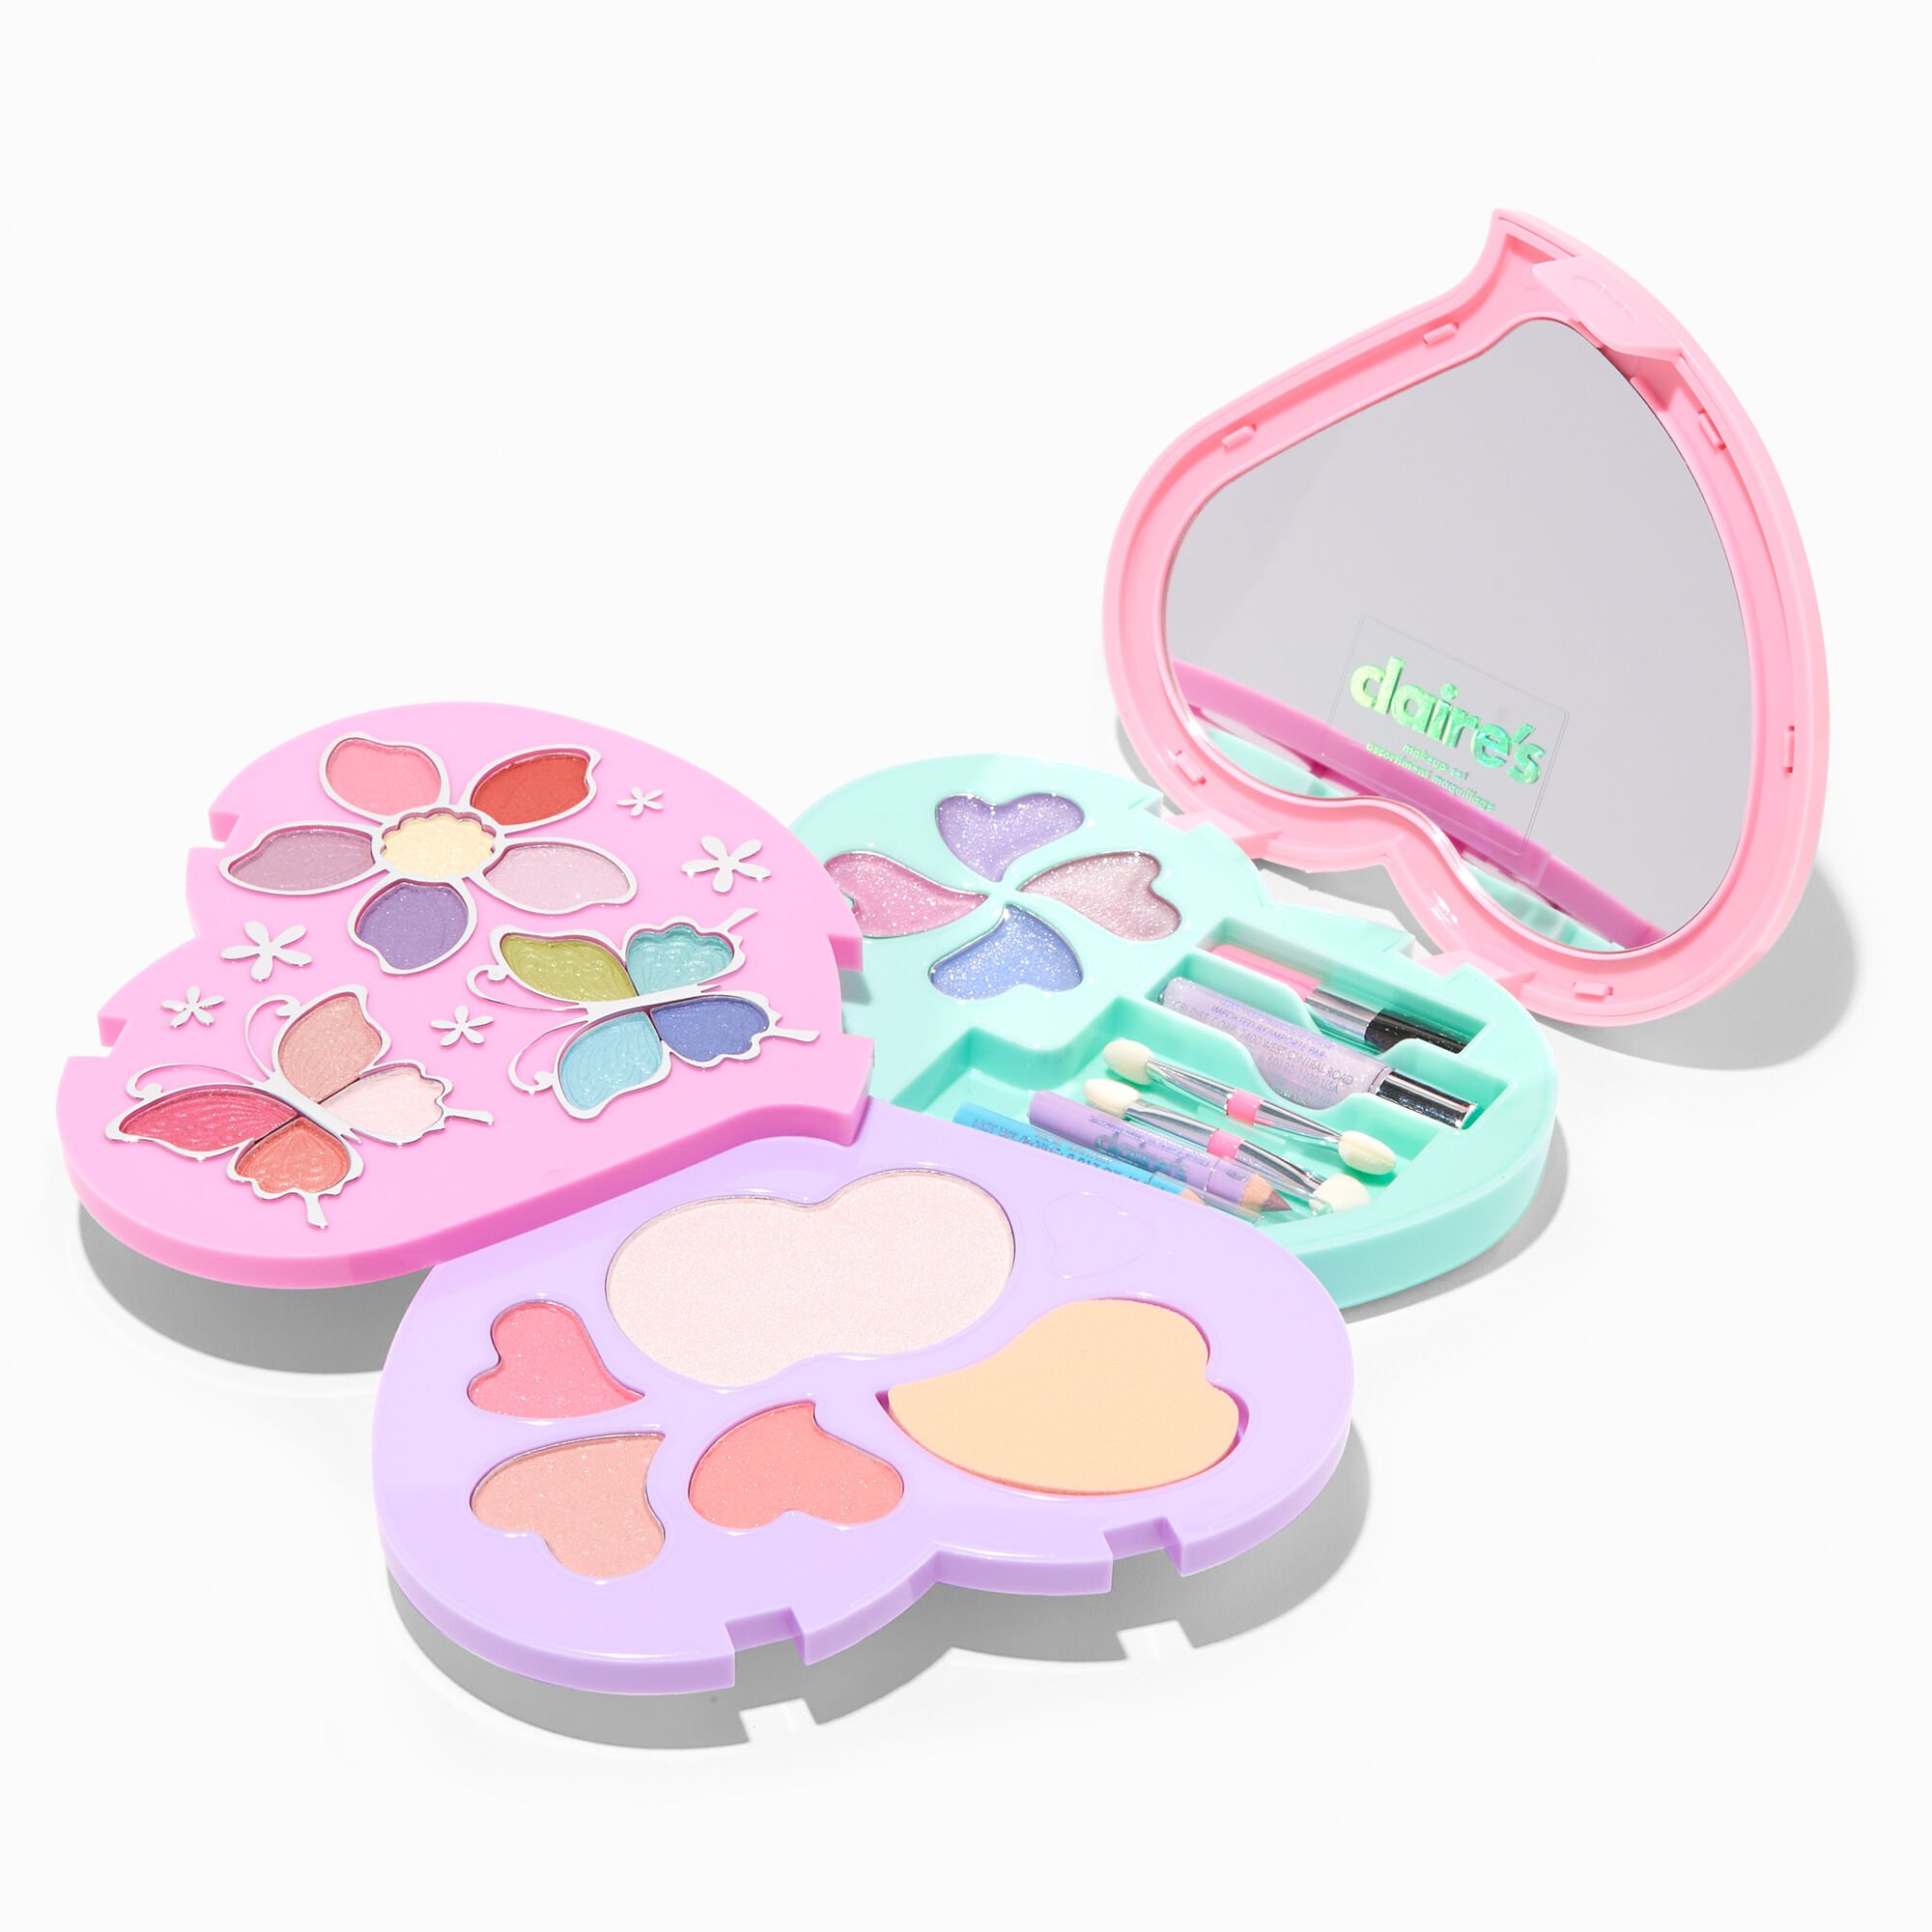 View Claires Pastel Heart Bling Makeup Set Rainbow information